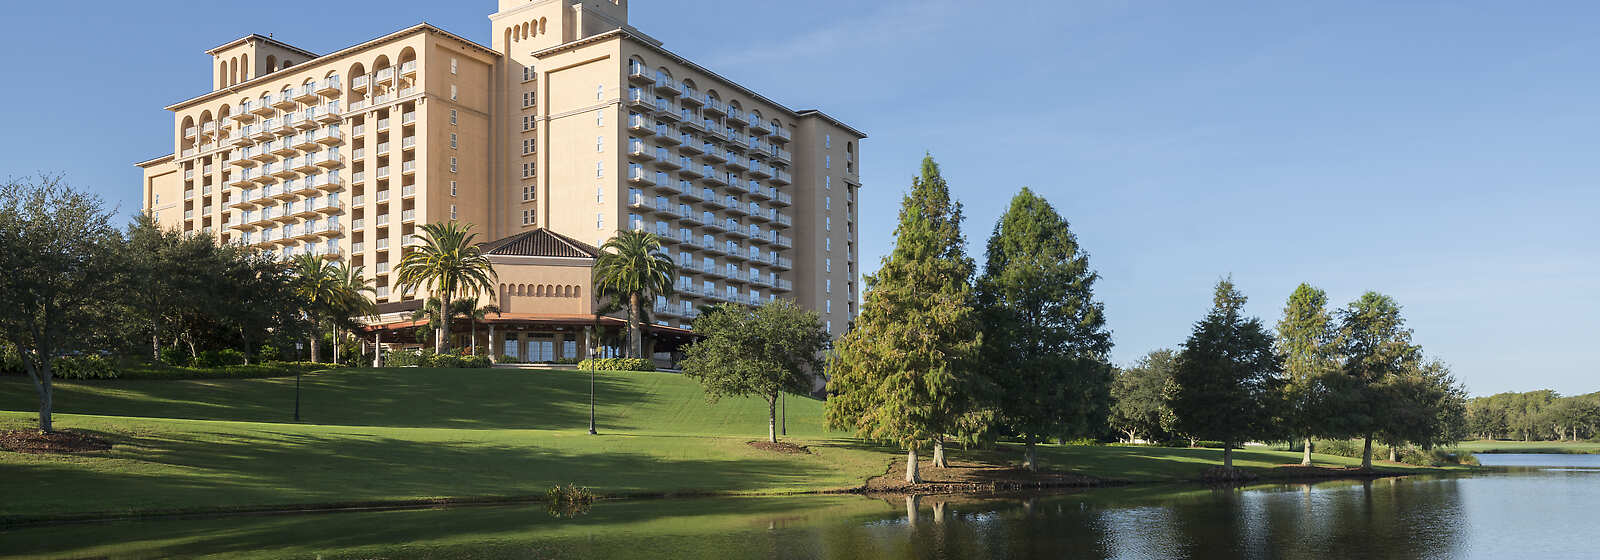 The Ritz-Carlton Orlando, Grande Lakes creates memories that stay long after you leave